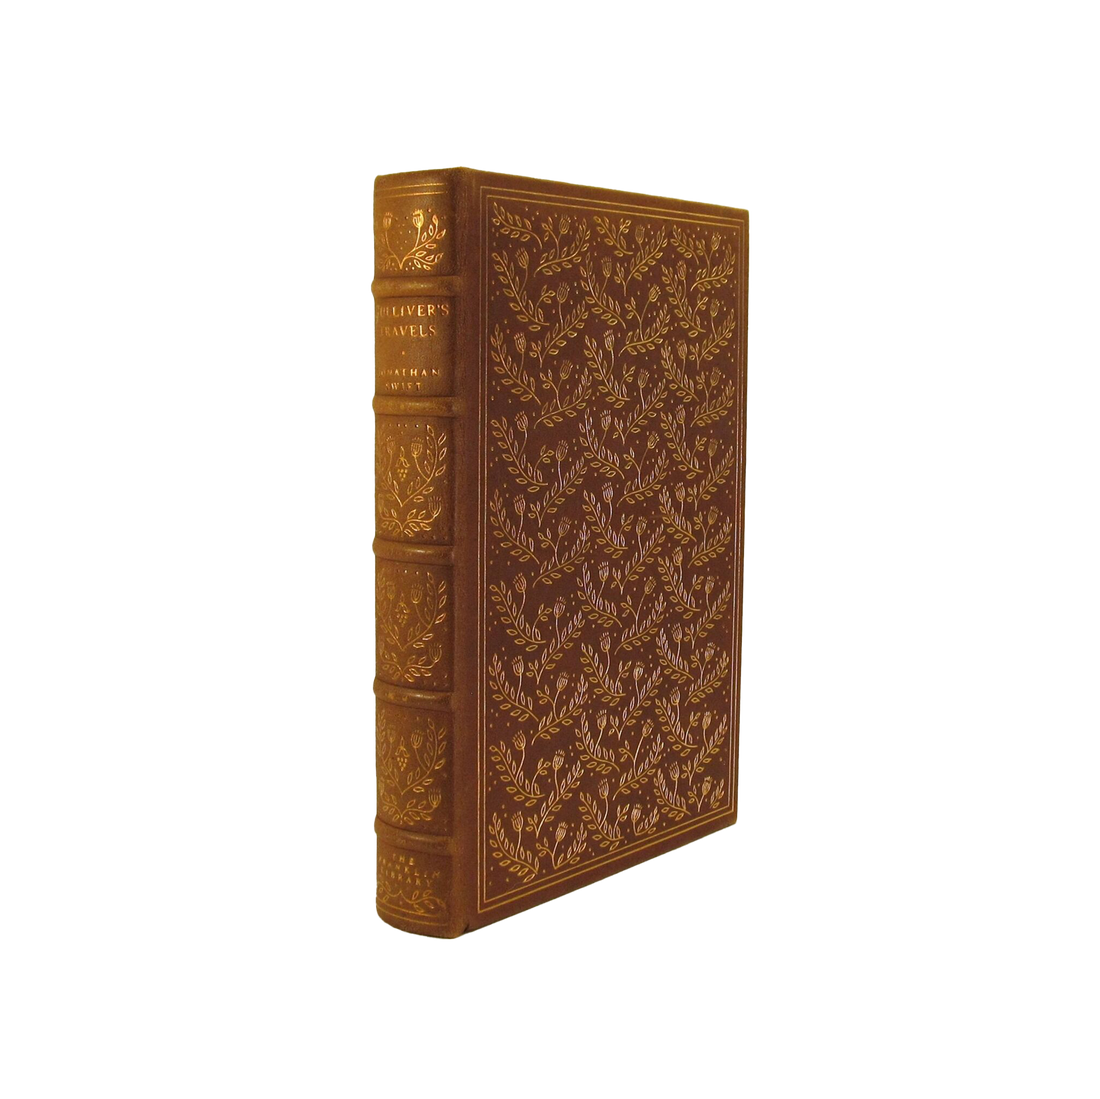 Leatherbound edition of Gulliver's Travels by Jonathan Swift with intricate cover detailing, available exclusively at Kadri Books.